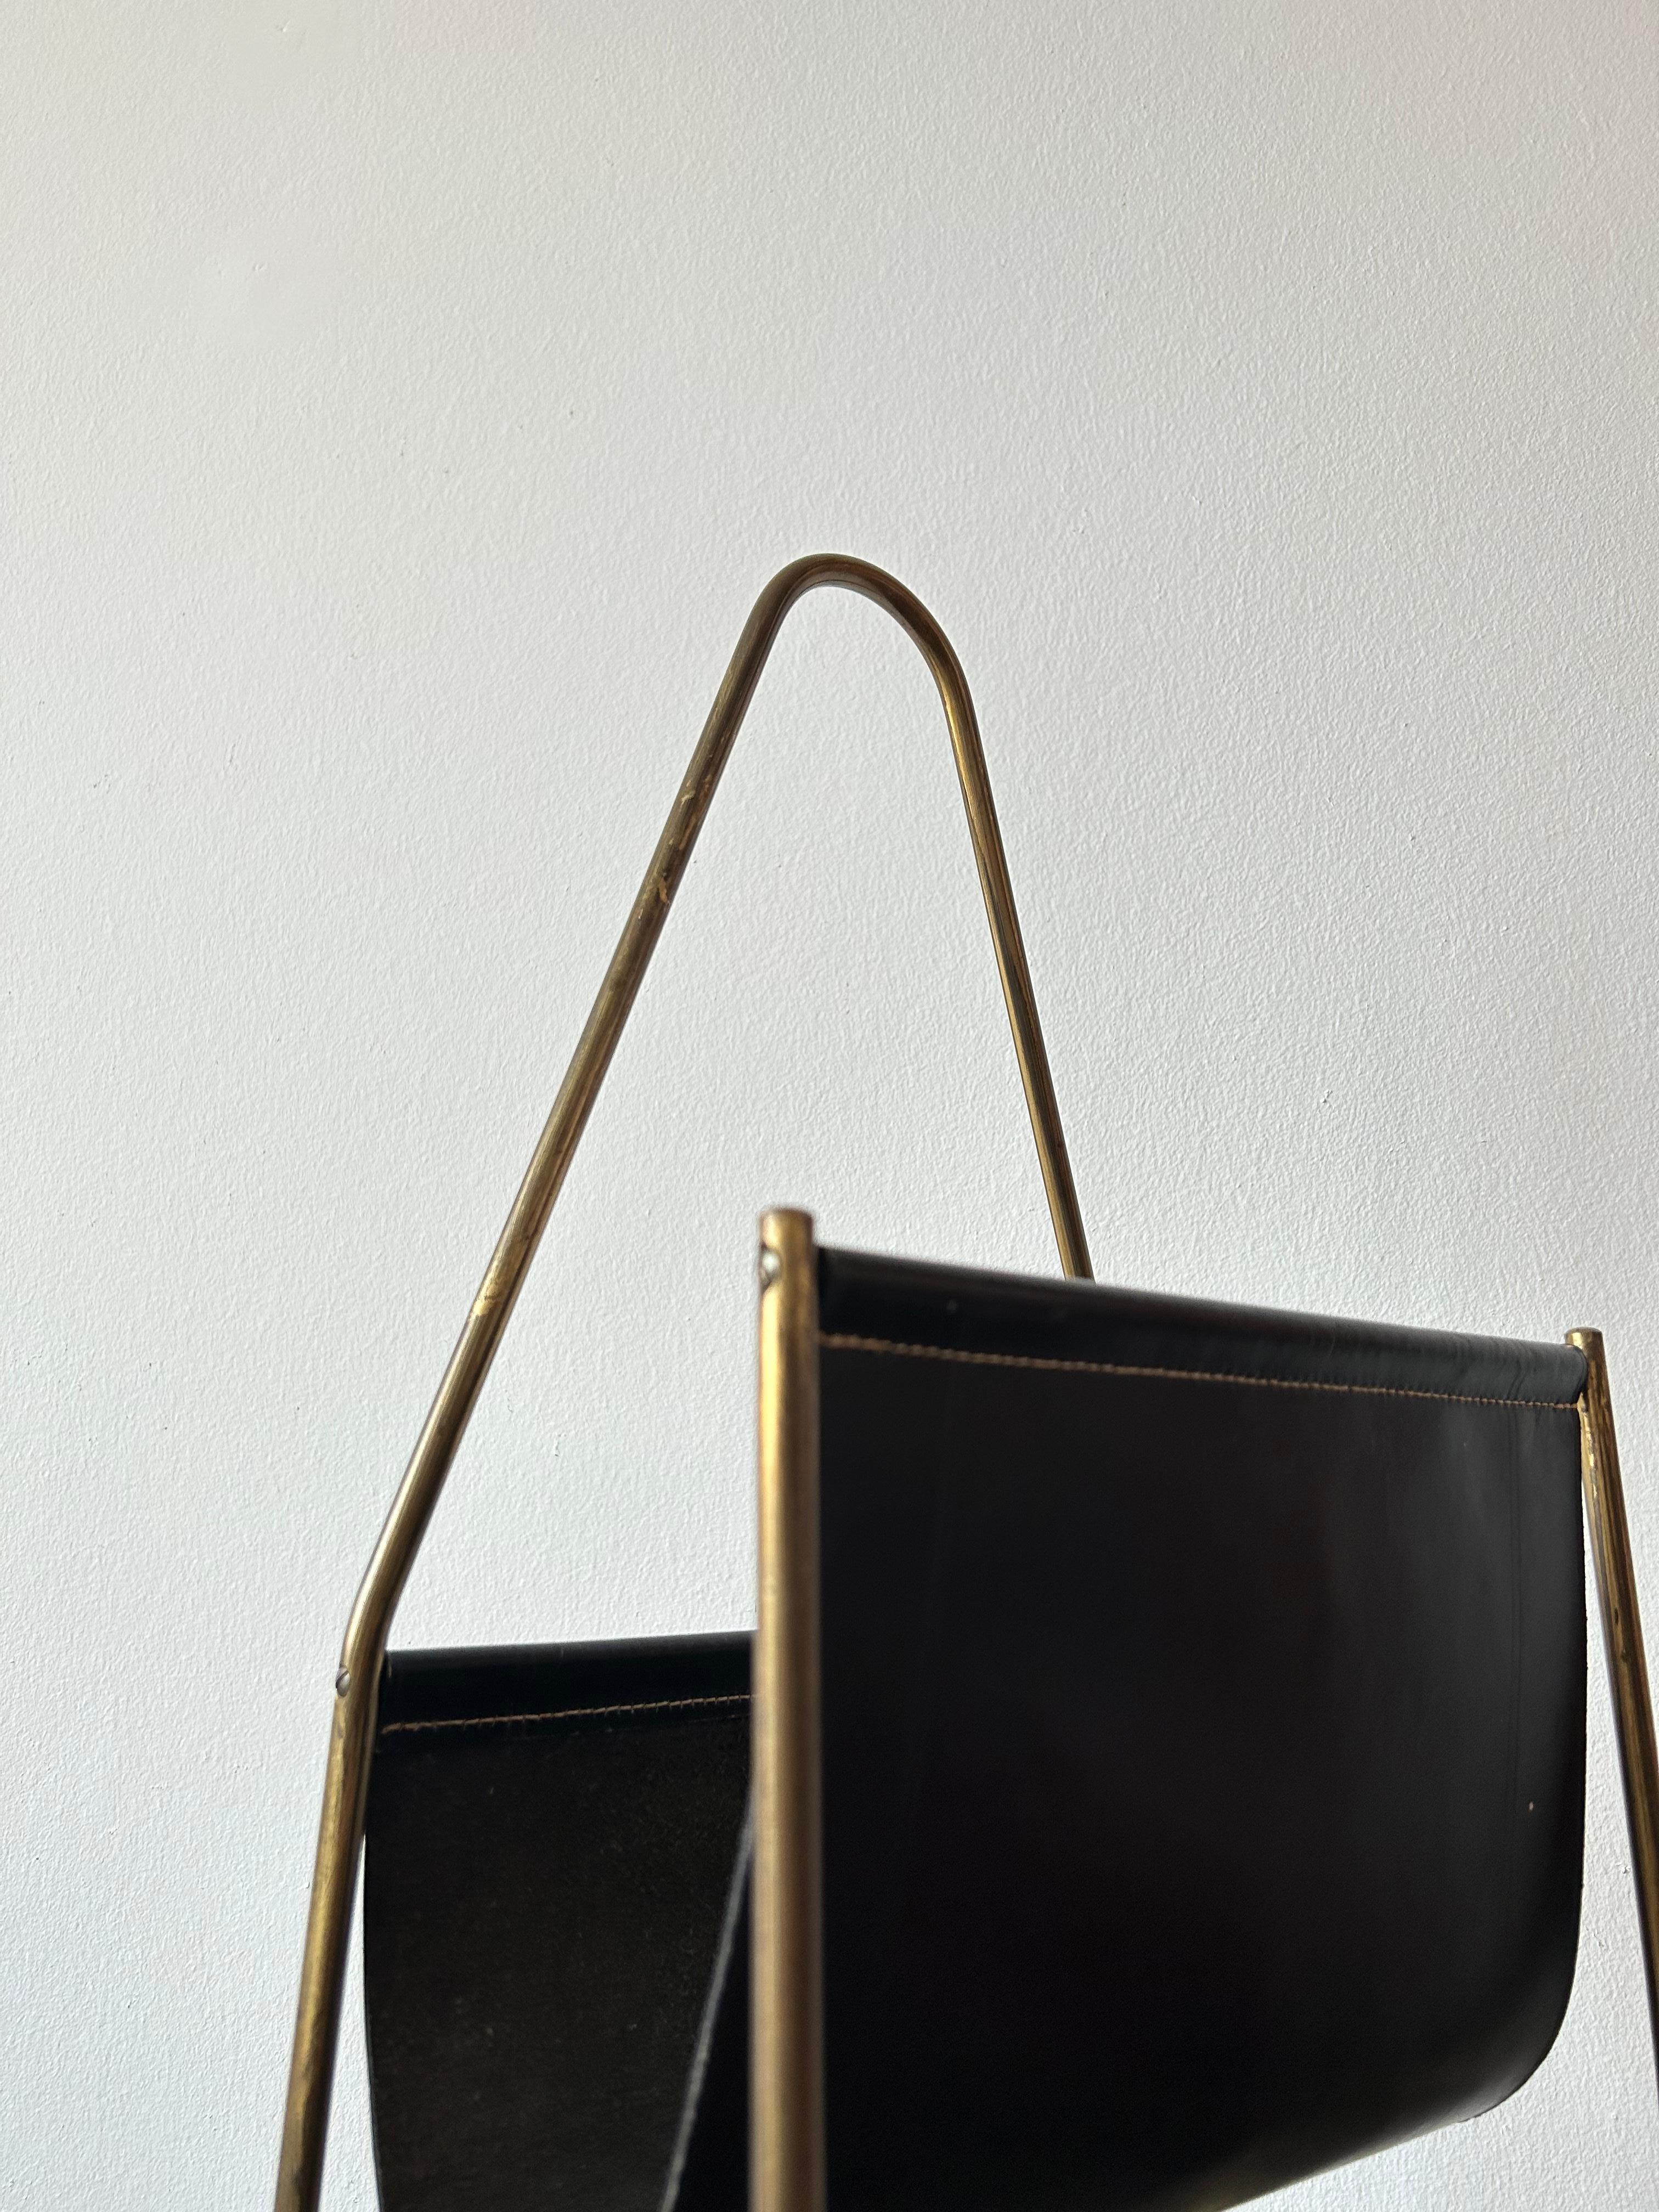 Magazine holder by Austrian designer Carl Auböck in patinaed brass and thick black leather which only will get more charming over the years.

The magazine holder is in good condition and the perfect detail to any interior and will fit all